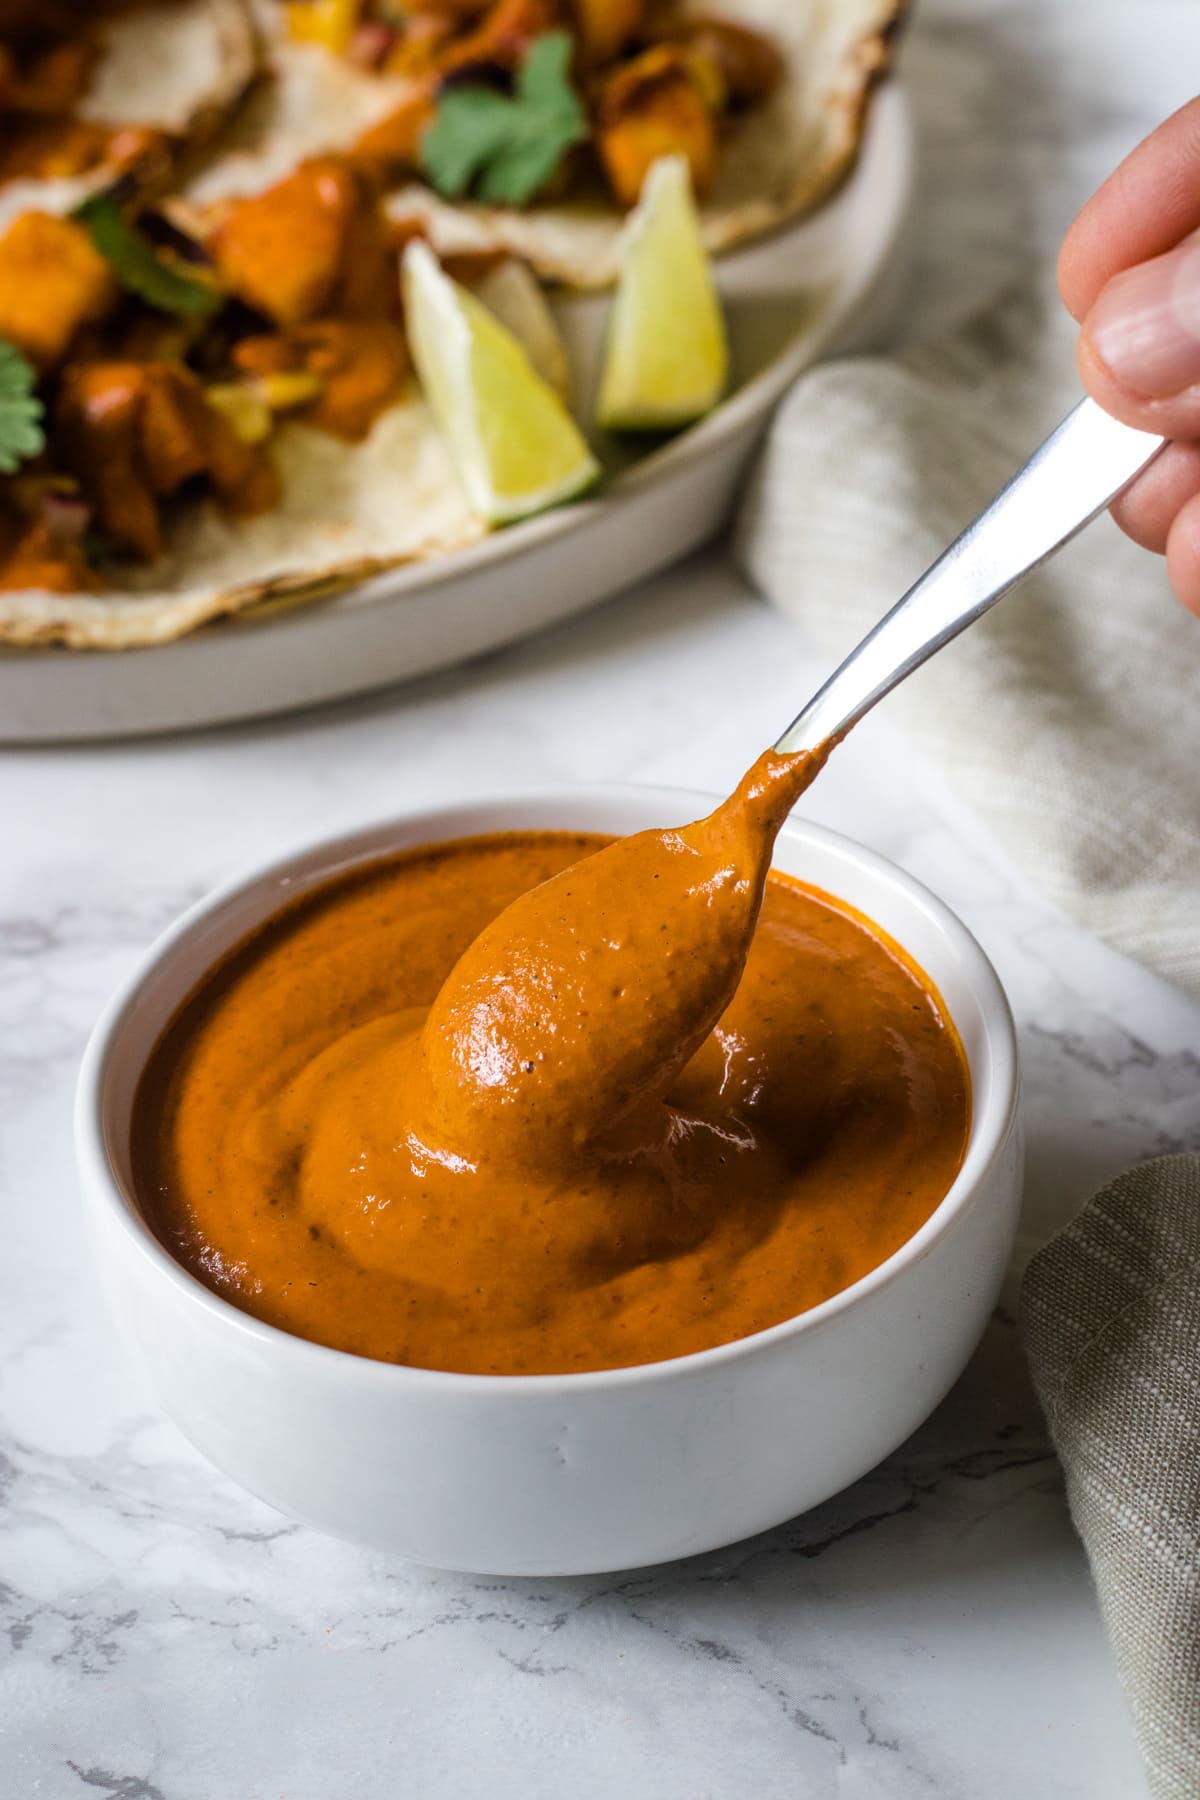 Image of chipotle sauce in a bowl with drizzle showing using small spoon.